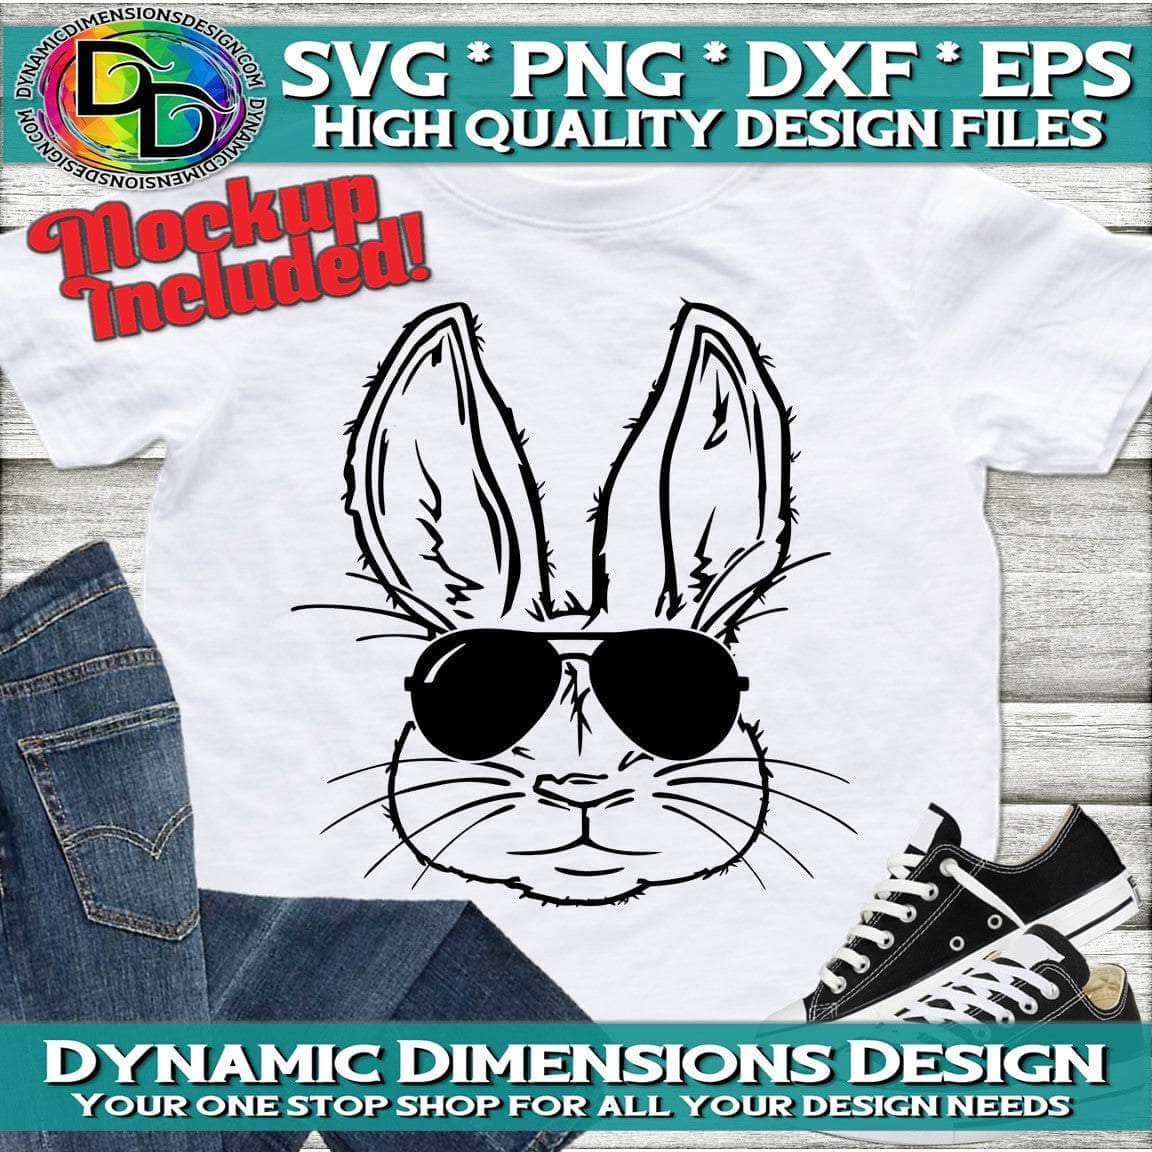 Bunny with Aviators svg, png, instant download, dxf, eps, pdf, jpg, cricut, silhouette, sublimtion, printable